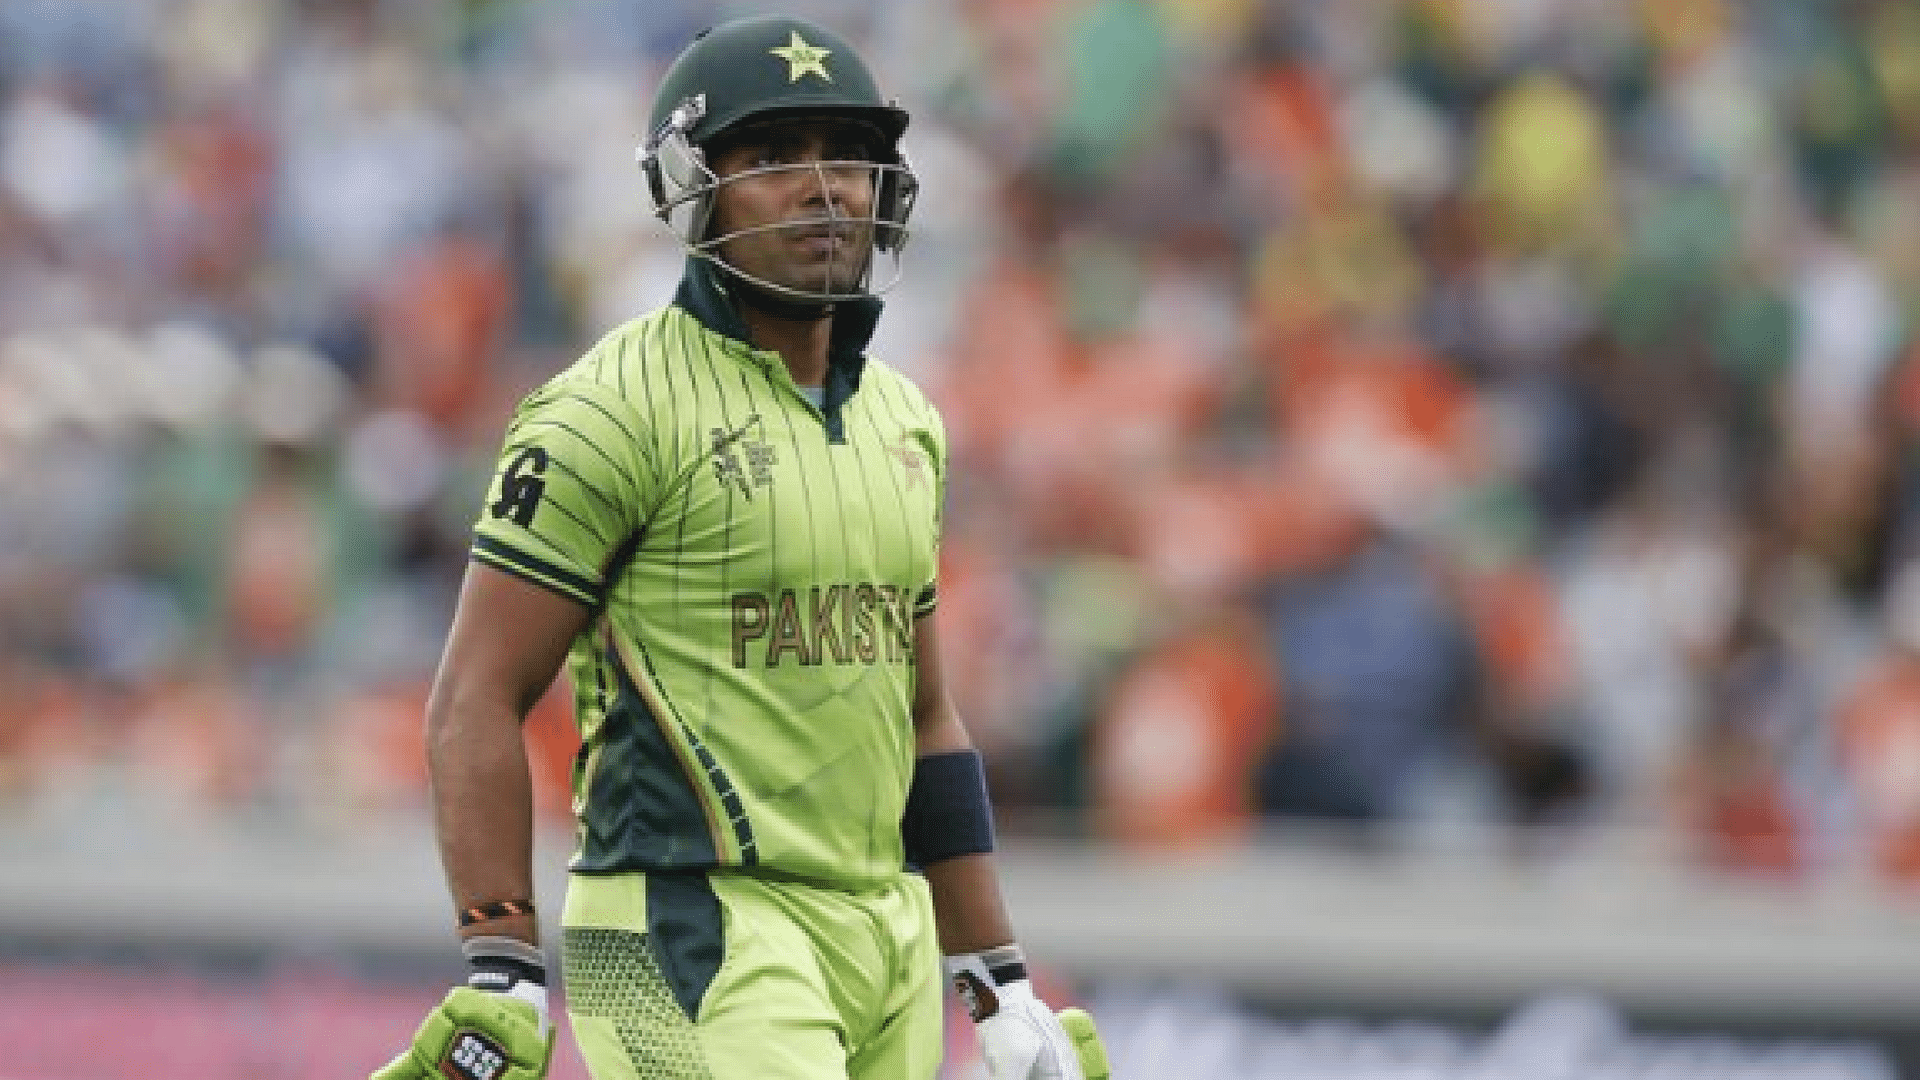 Pakistan’s out-of-favour wicketkeeper Umar Akmal could face disciplinary action after he reportedly asked a trainer “where is the fat” while exposing himself completely during a fitness test.